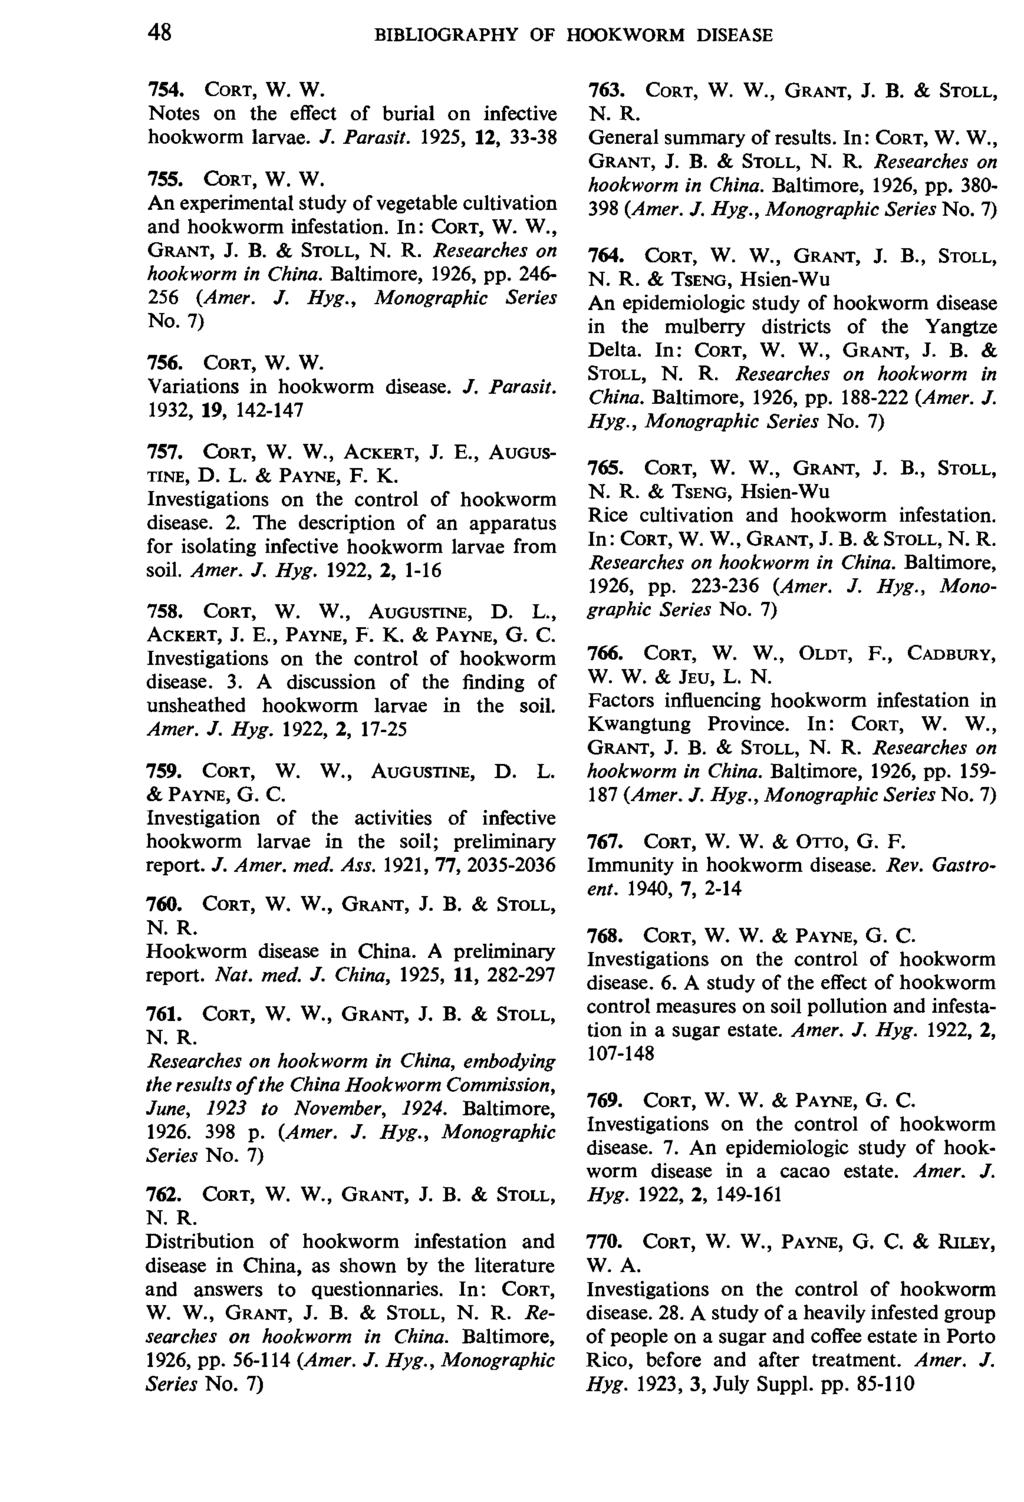 48 BIBLIOGRAPHY OF HOOKWORM DISEASE 754. CORT, W. w. Notes on the effect of burial on infective hookworm larvae. J. Parasit. 1925, 12, 33-38 755. CoRT, W. W. An experimental study of vegetable cultivation and hookworm infestation.